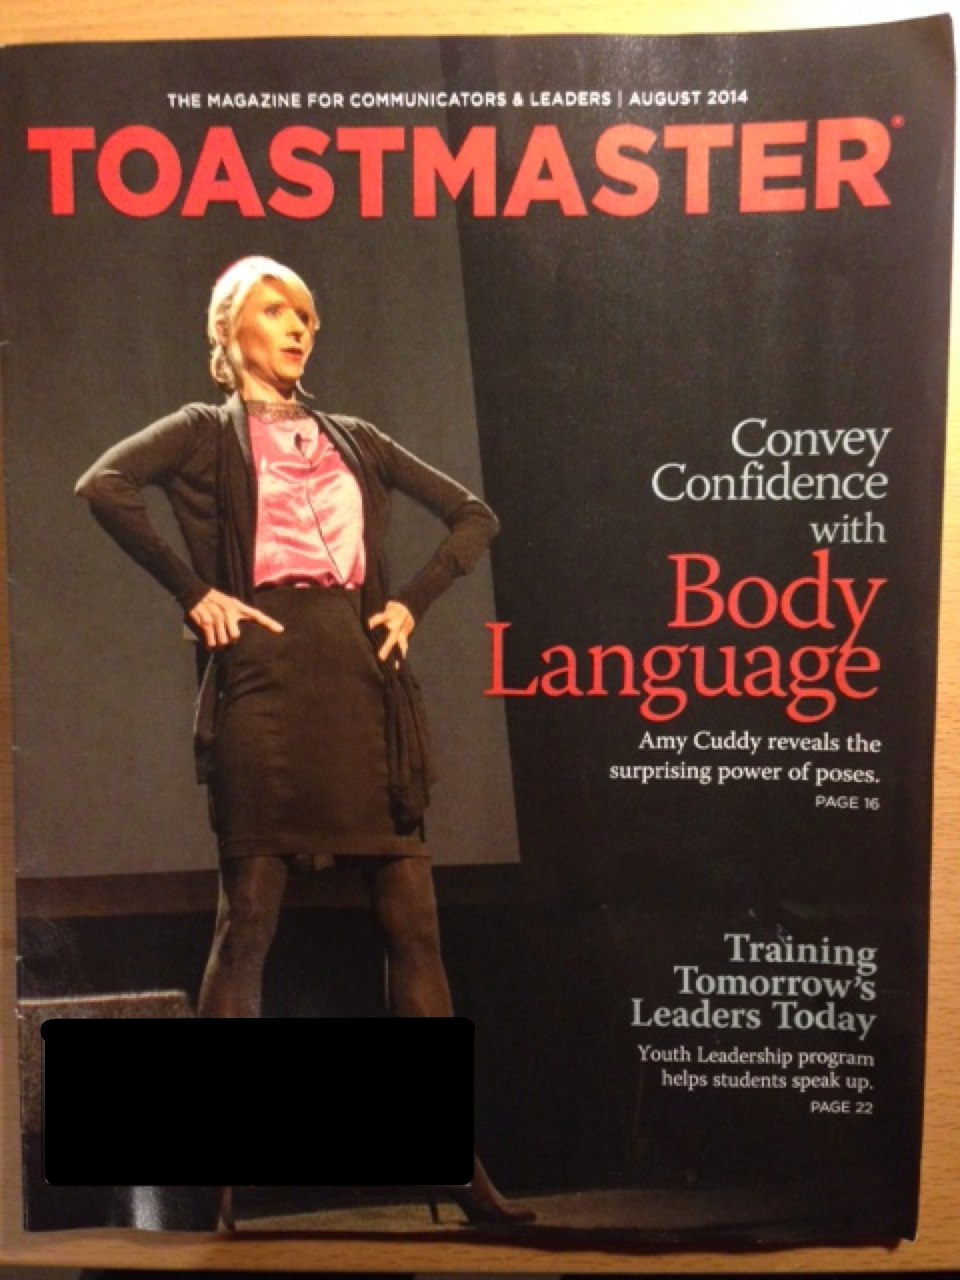 Amy Cuddy on the cover of Toastmaster Magazine